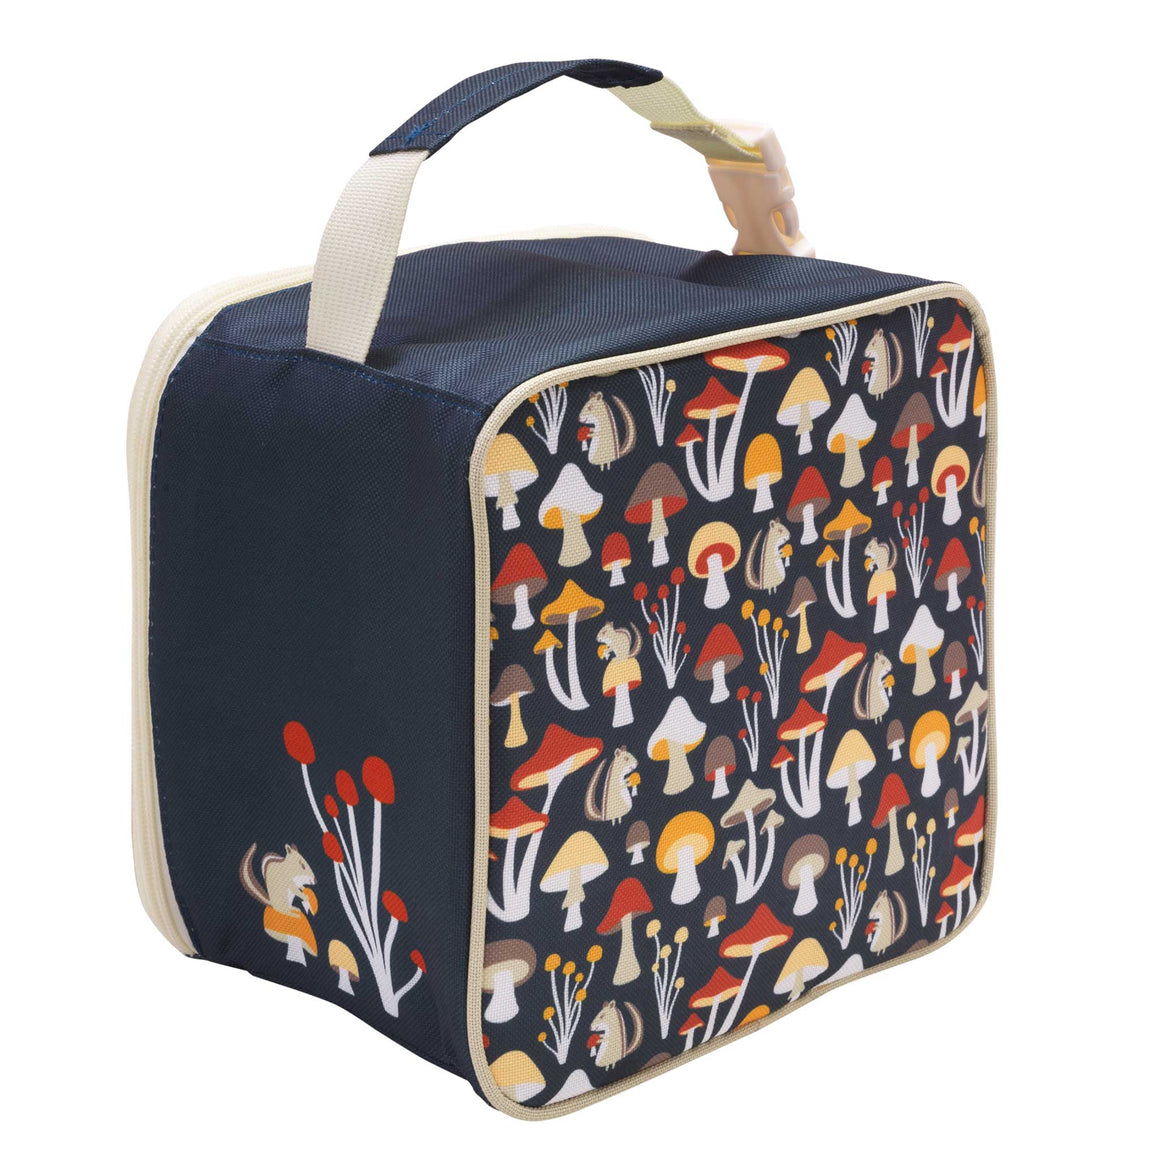 Mostly Mushrooms - Super Zippee Lunch Tote